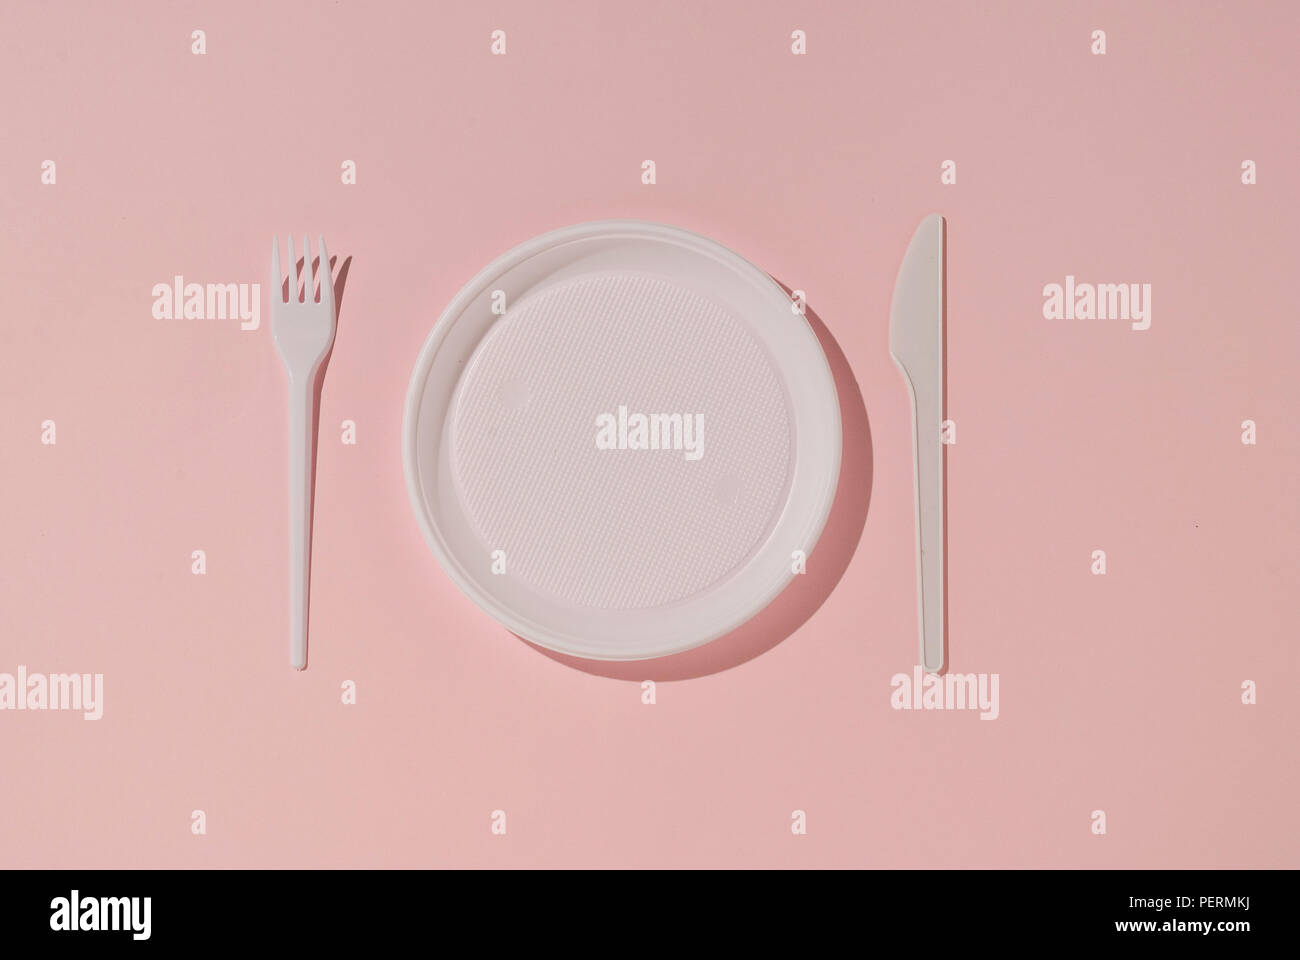 White plastic plate, knife and fork on a pink background. Plastic tableware. Stock Photo